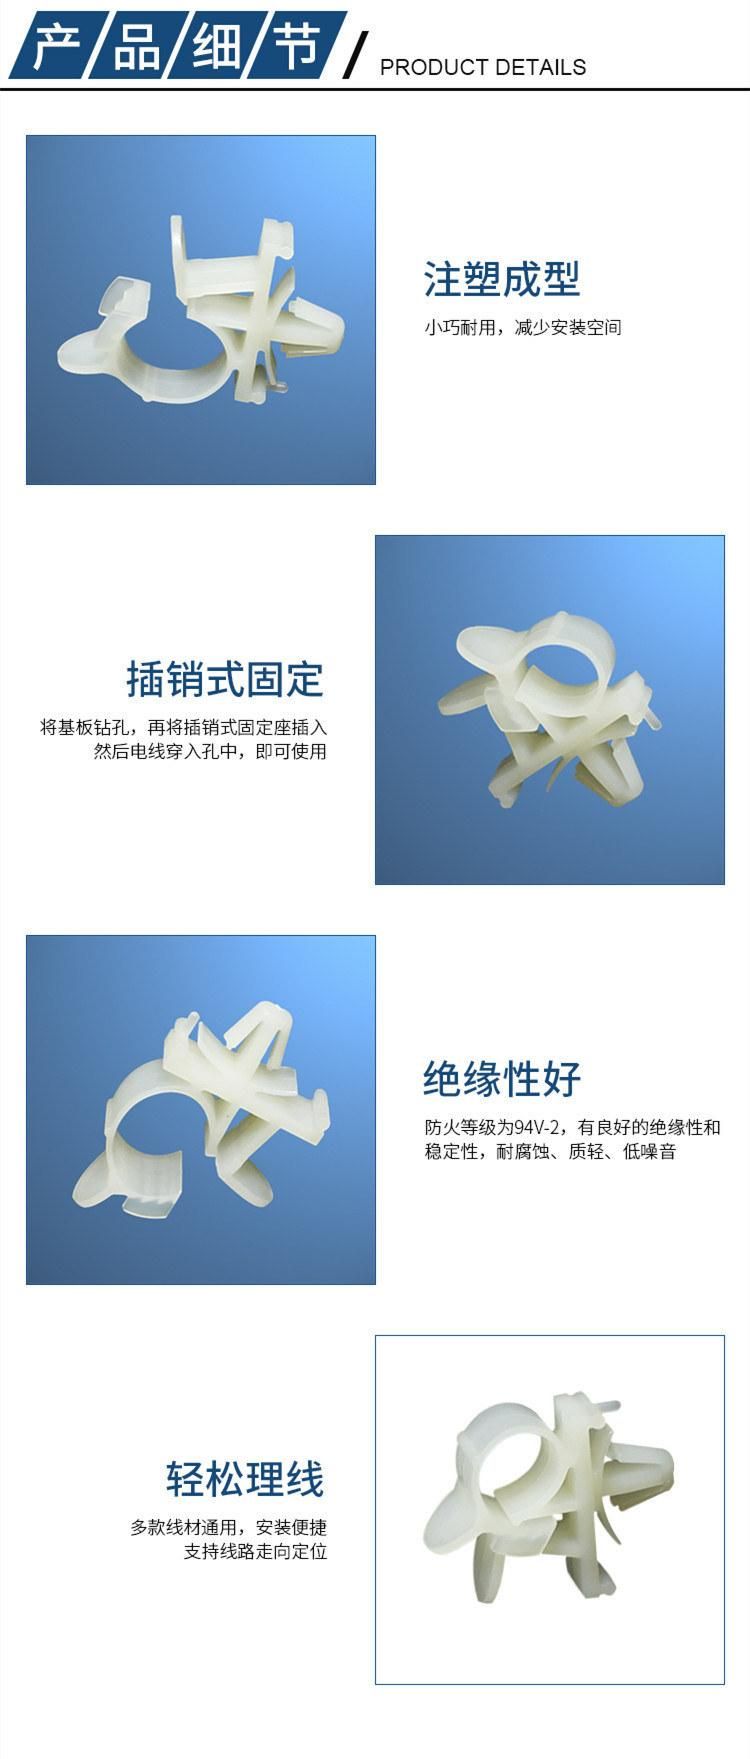 Wire and Cable Buckle Wire Routing Positioning, Heyingcn Plastic Injection Clip Buckle Nylon Cable Clip